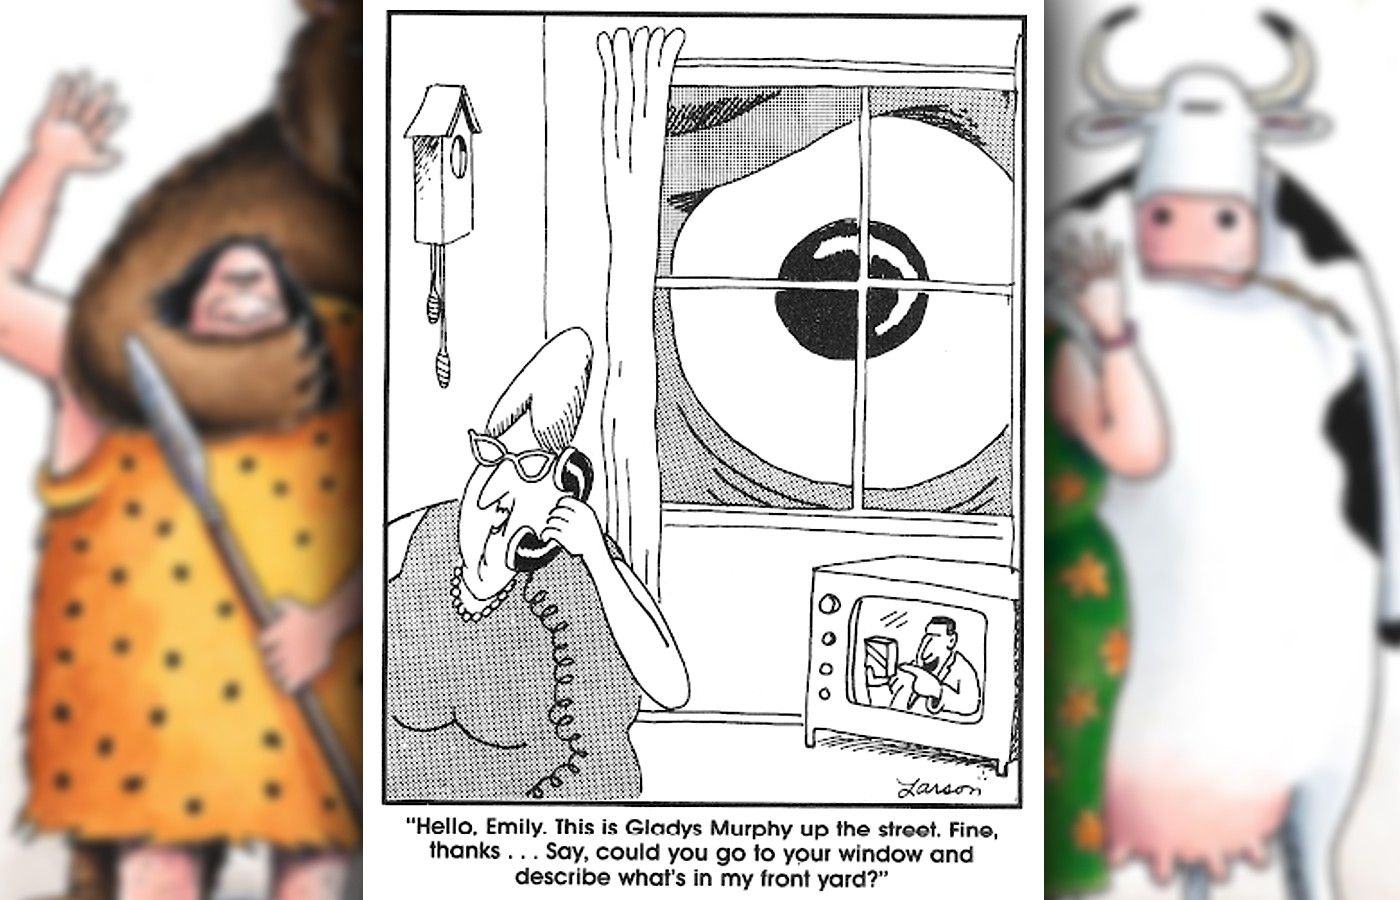 the far side a woman calls her neighbor to have her describe the monster at her window, which is just an eye to her